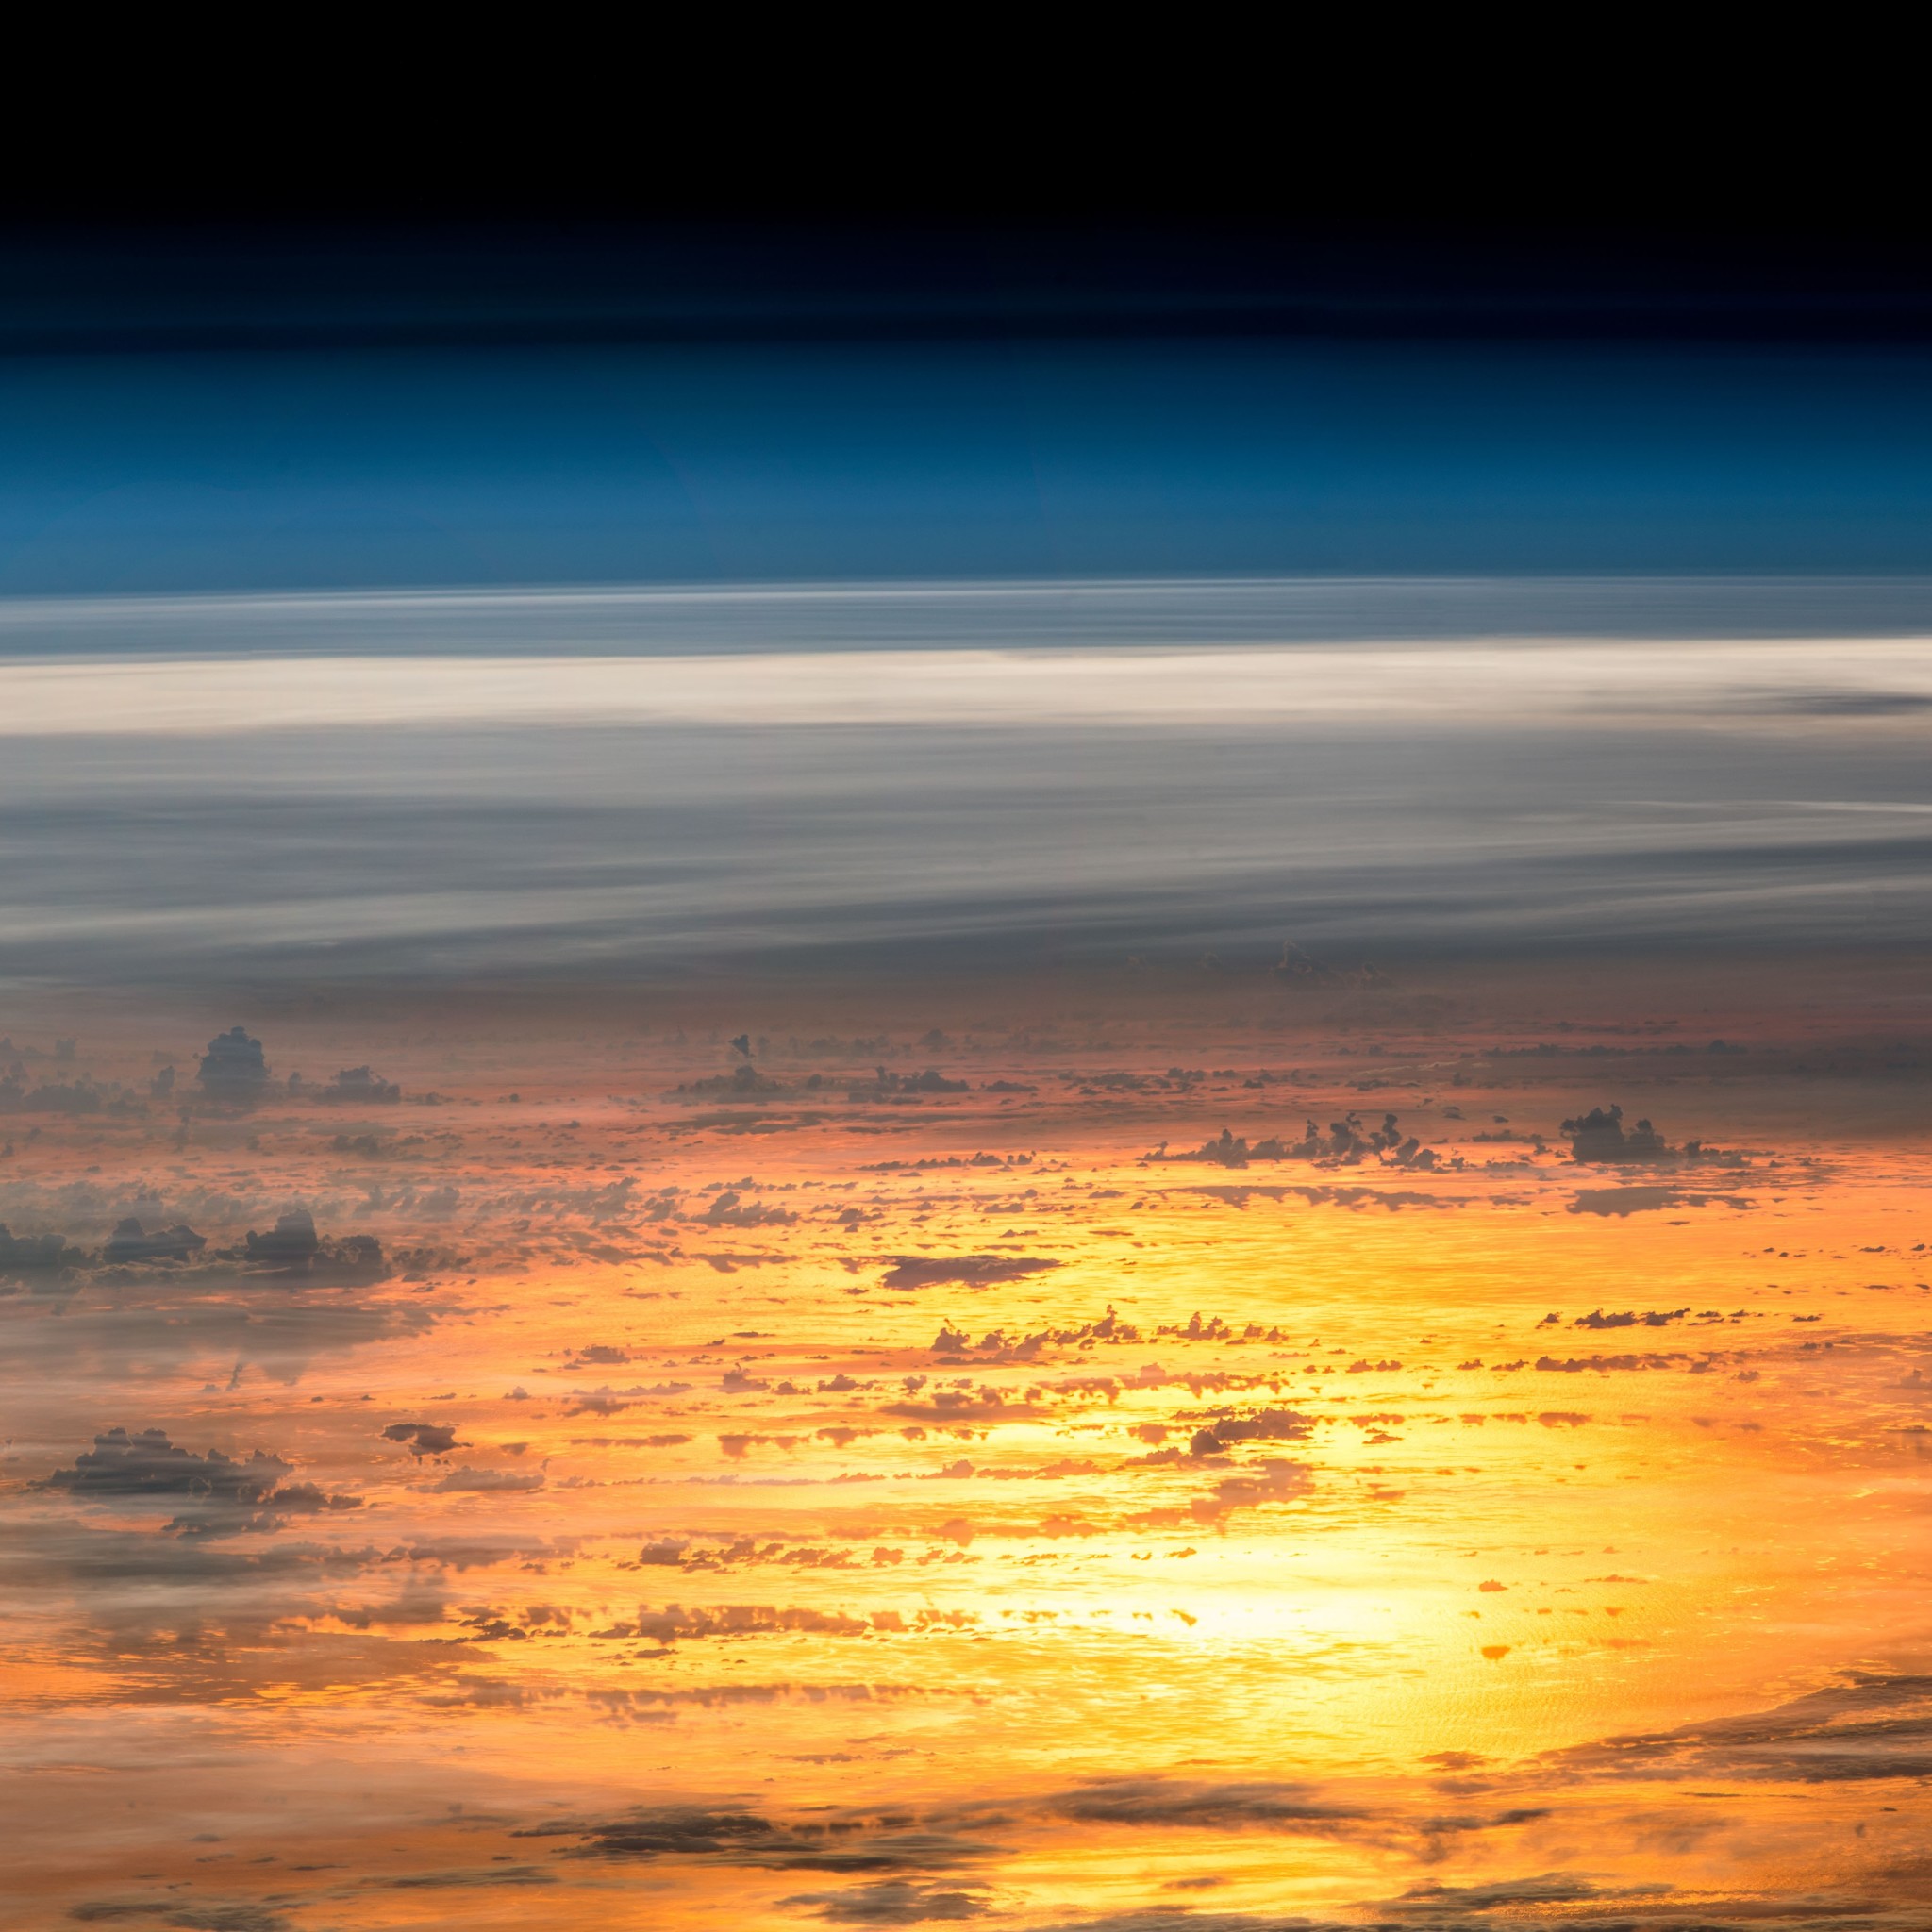 Earth From Space Sunset - HD Wallpaper 